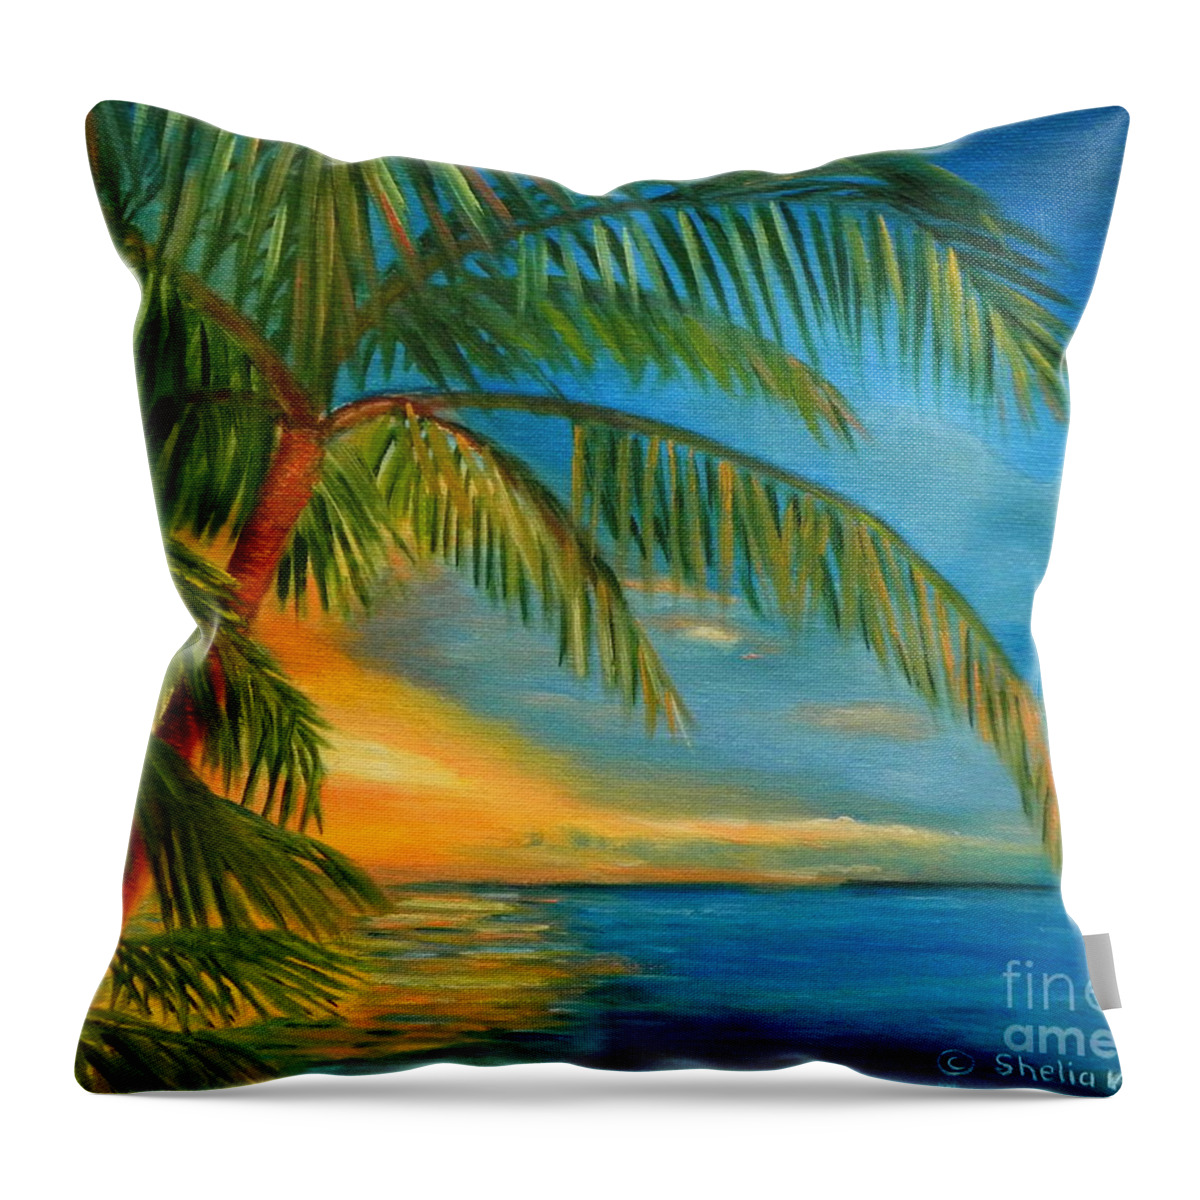 Art Throw Pillow featuring the painting Sunset Reflections - Key West Sunset and Palm Trees by Shelia Kempf